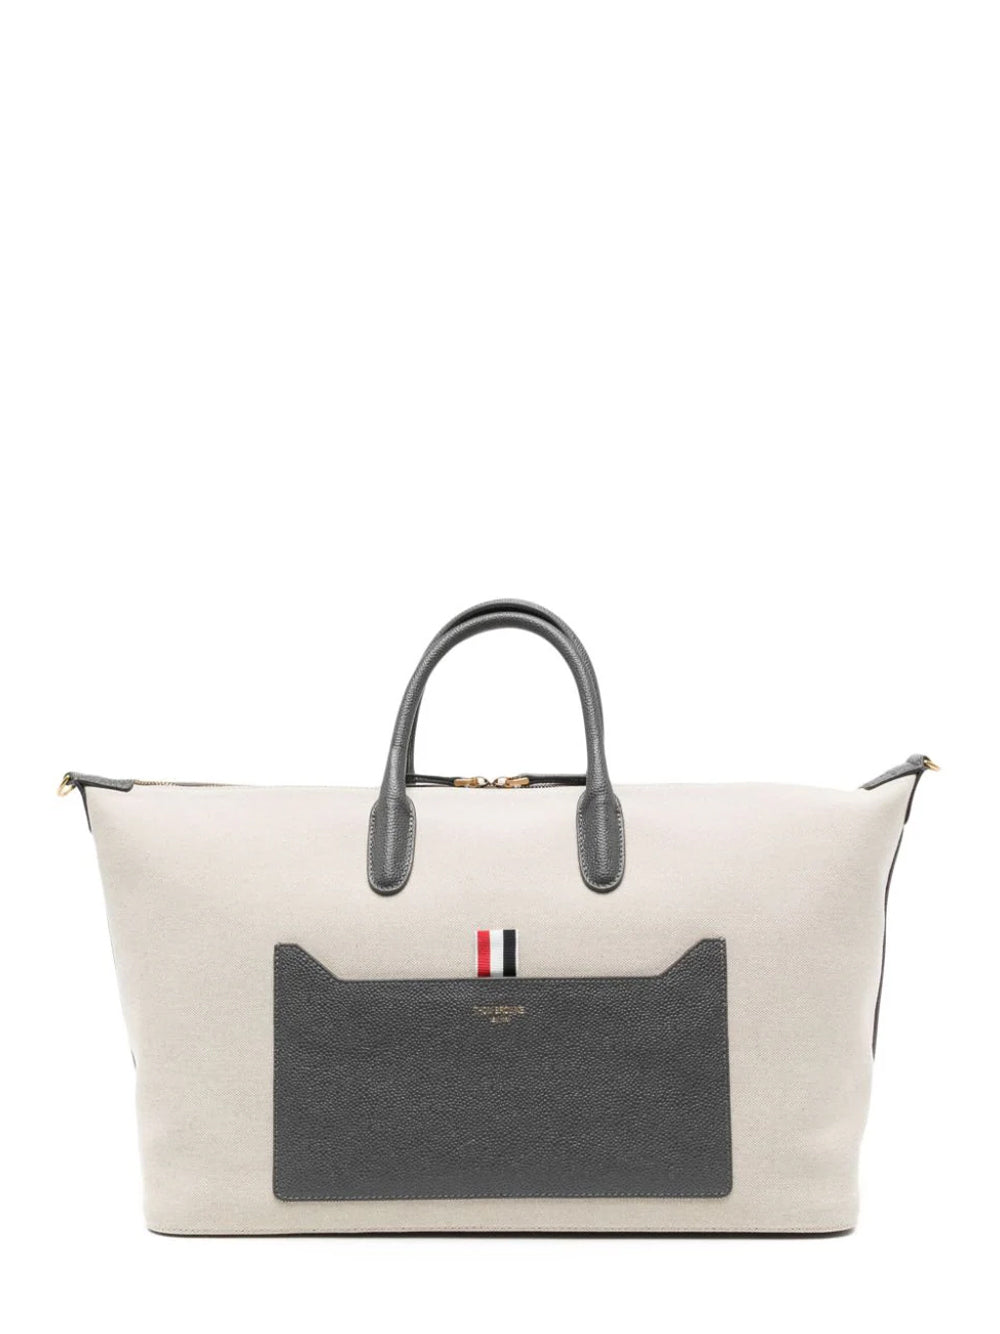 Thom_Browne_Medium_Soft_Duffle_W_Shoulder_Strap_In_Salt_And_Pepper_Cotton_Canvas_Natural_01